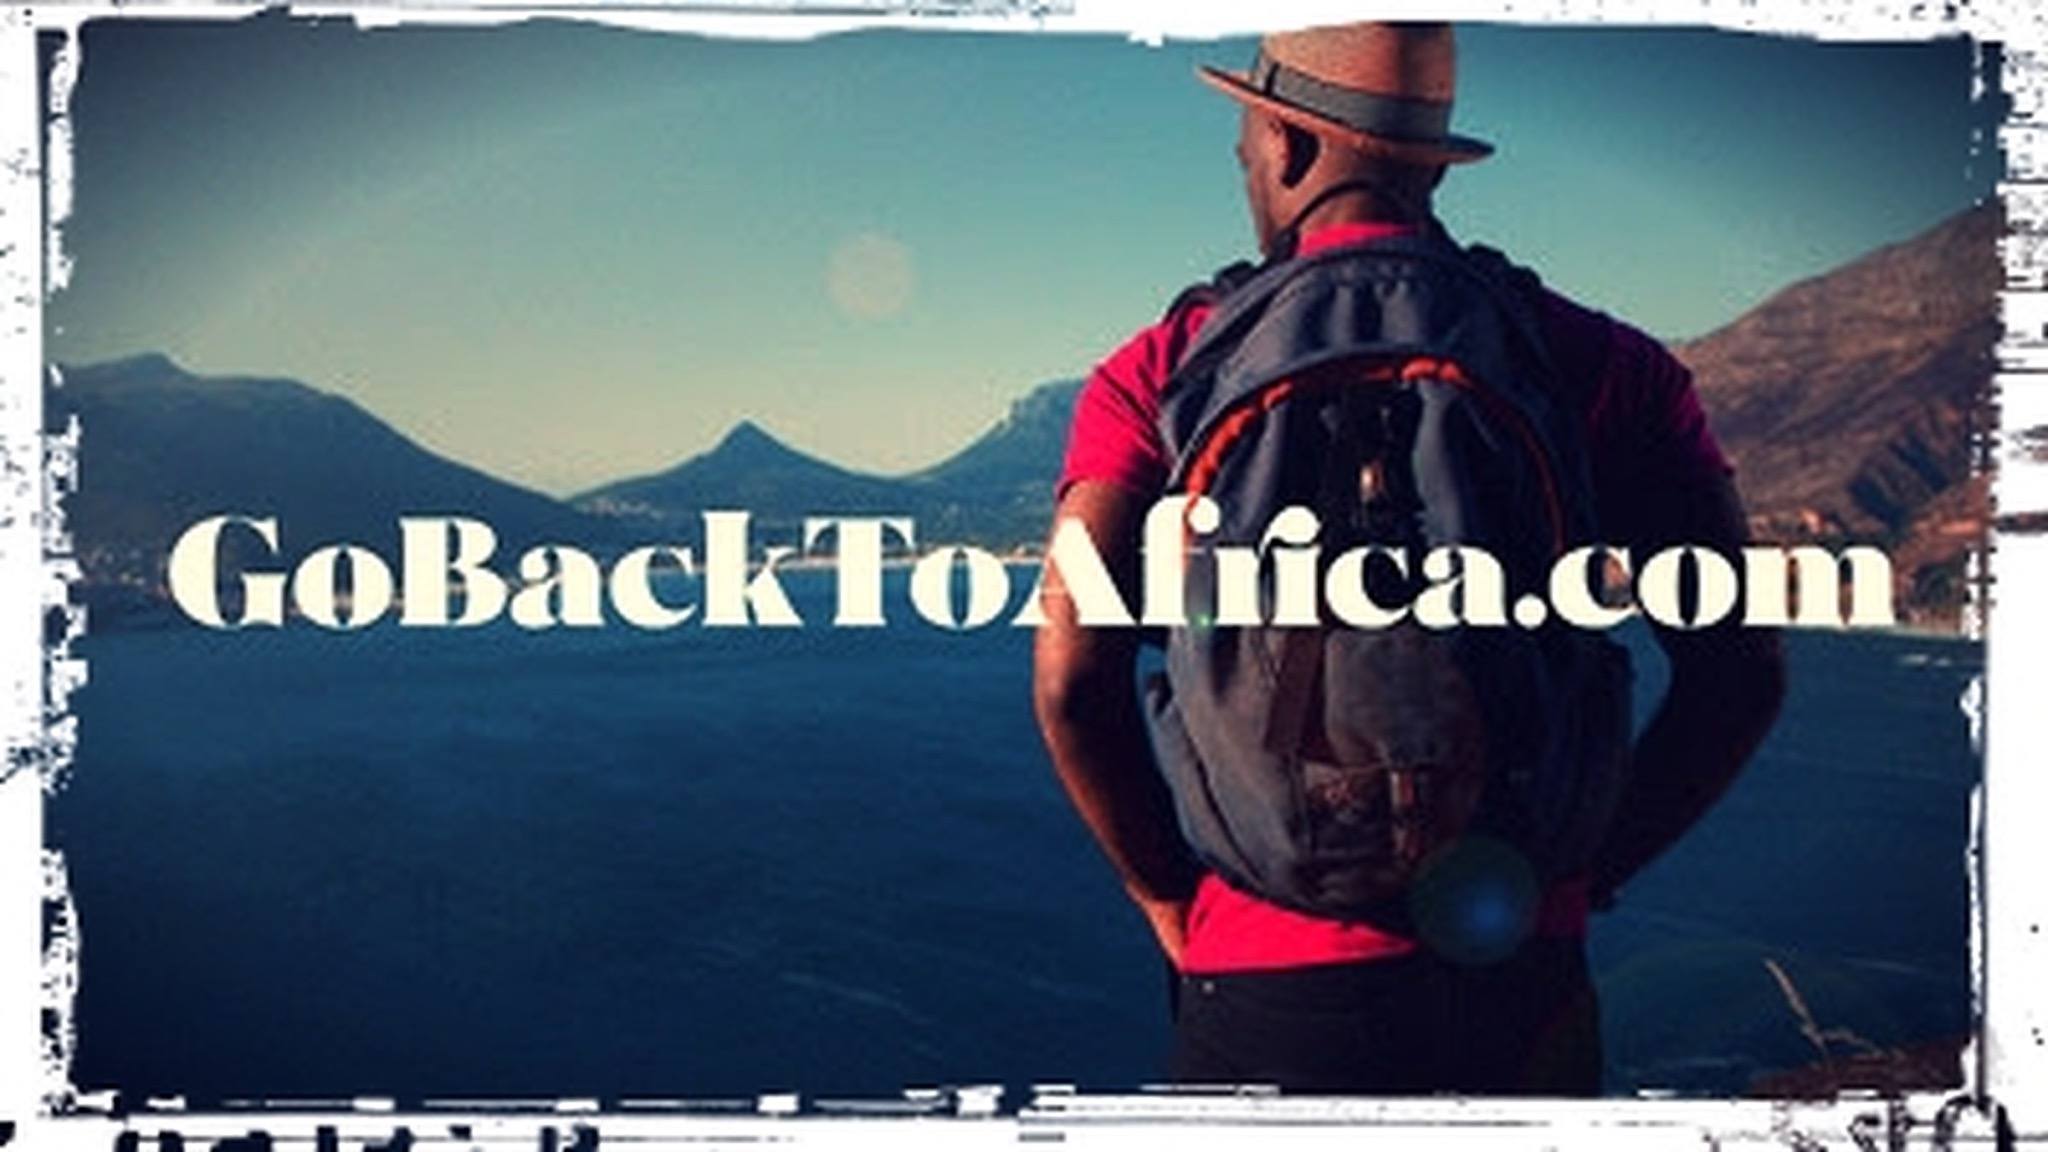 Black & Abroad Recommits to “Go Back to Africa” Campaign in the Midst of Racist Rhetoric in the U.S.